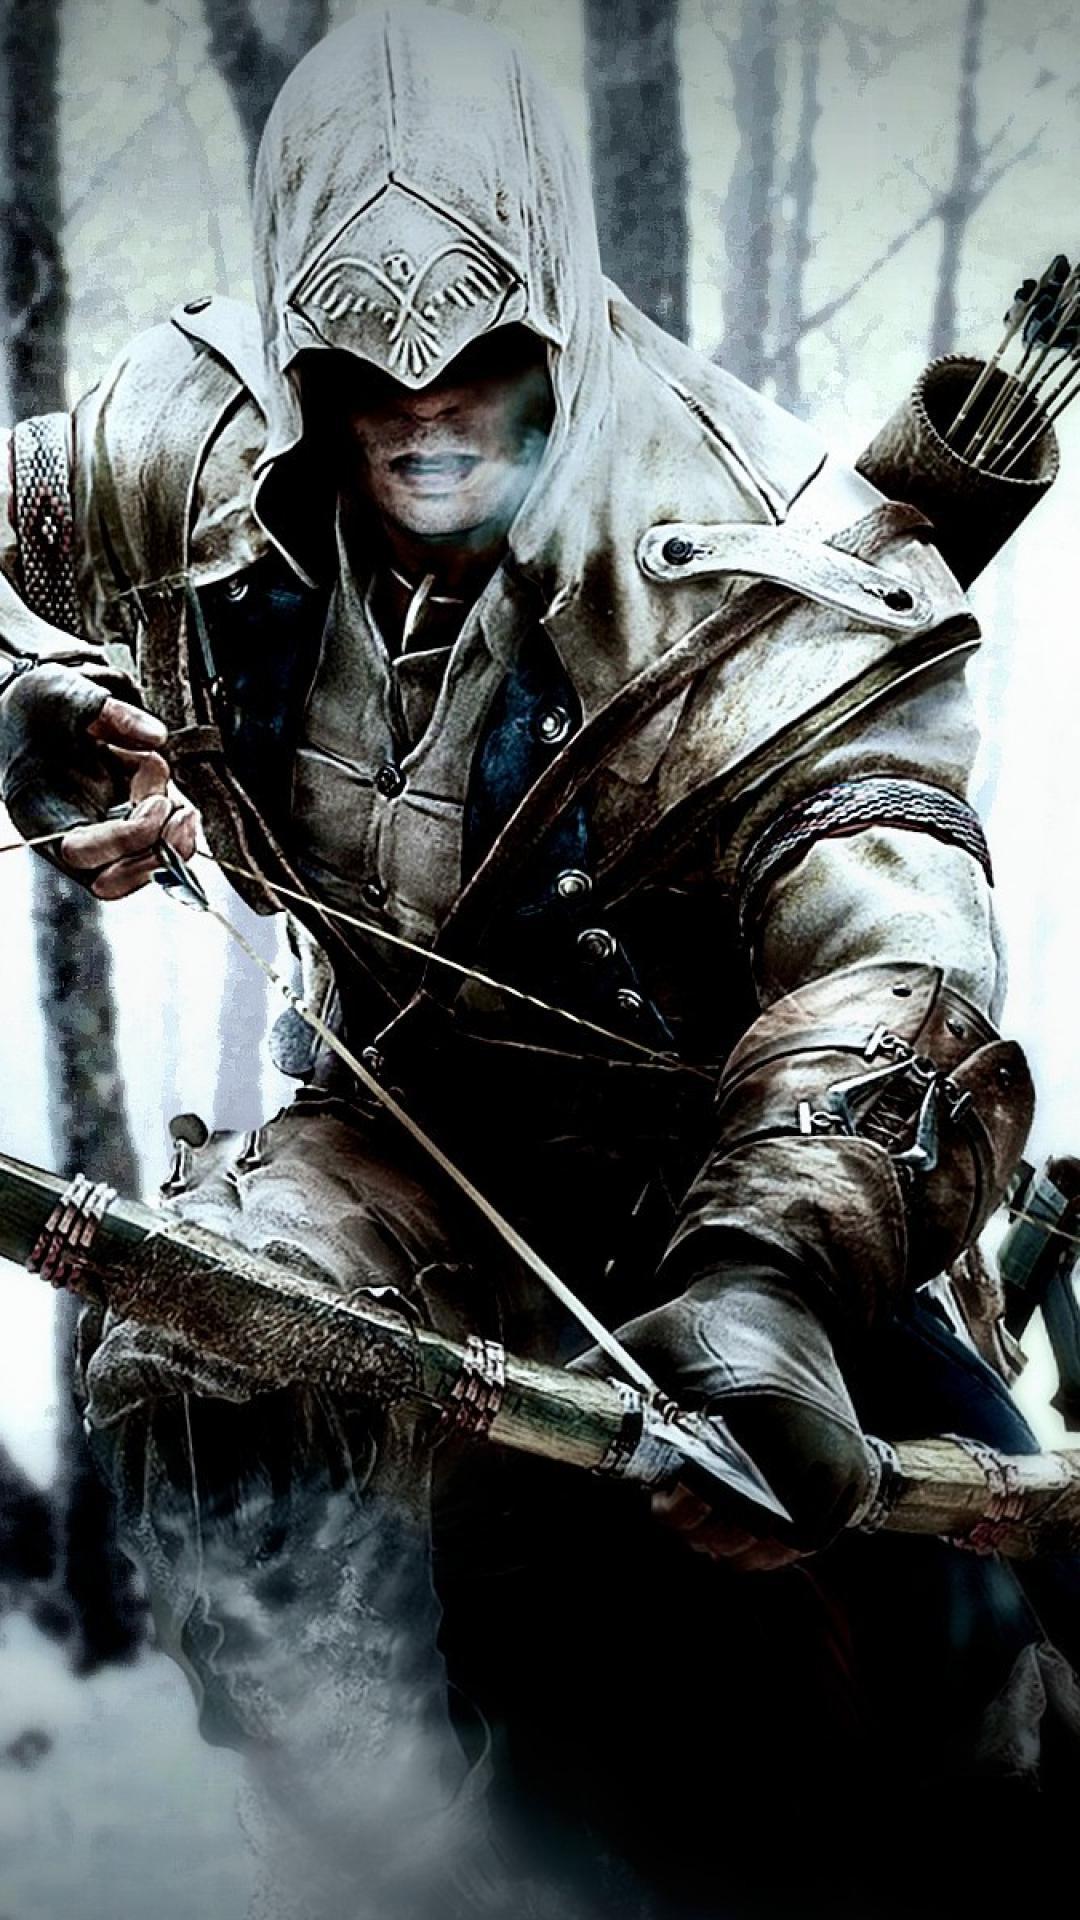 Assassin's Creed III Mobile Wallpapers - Wallpaper Cave